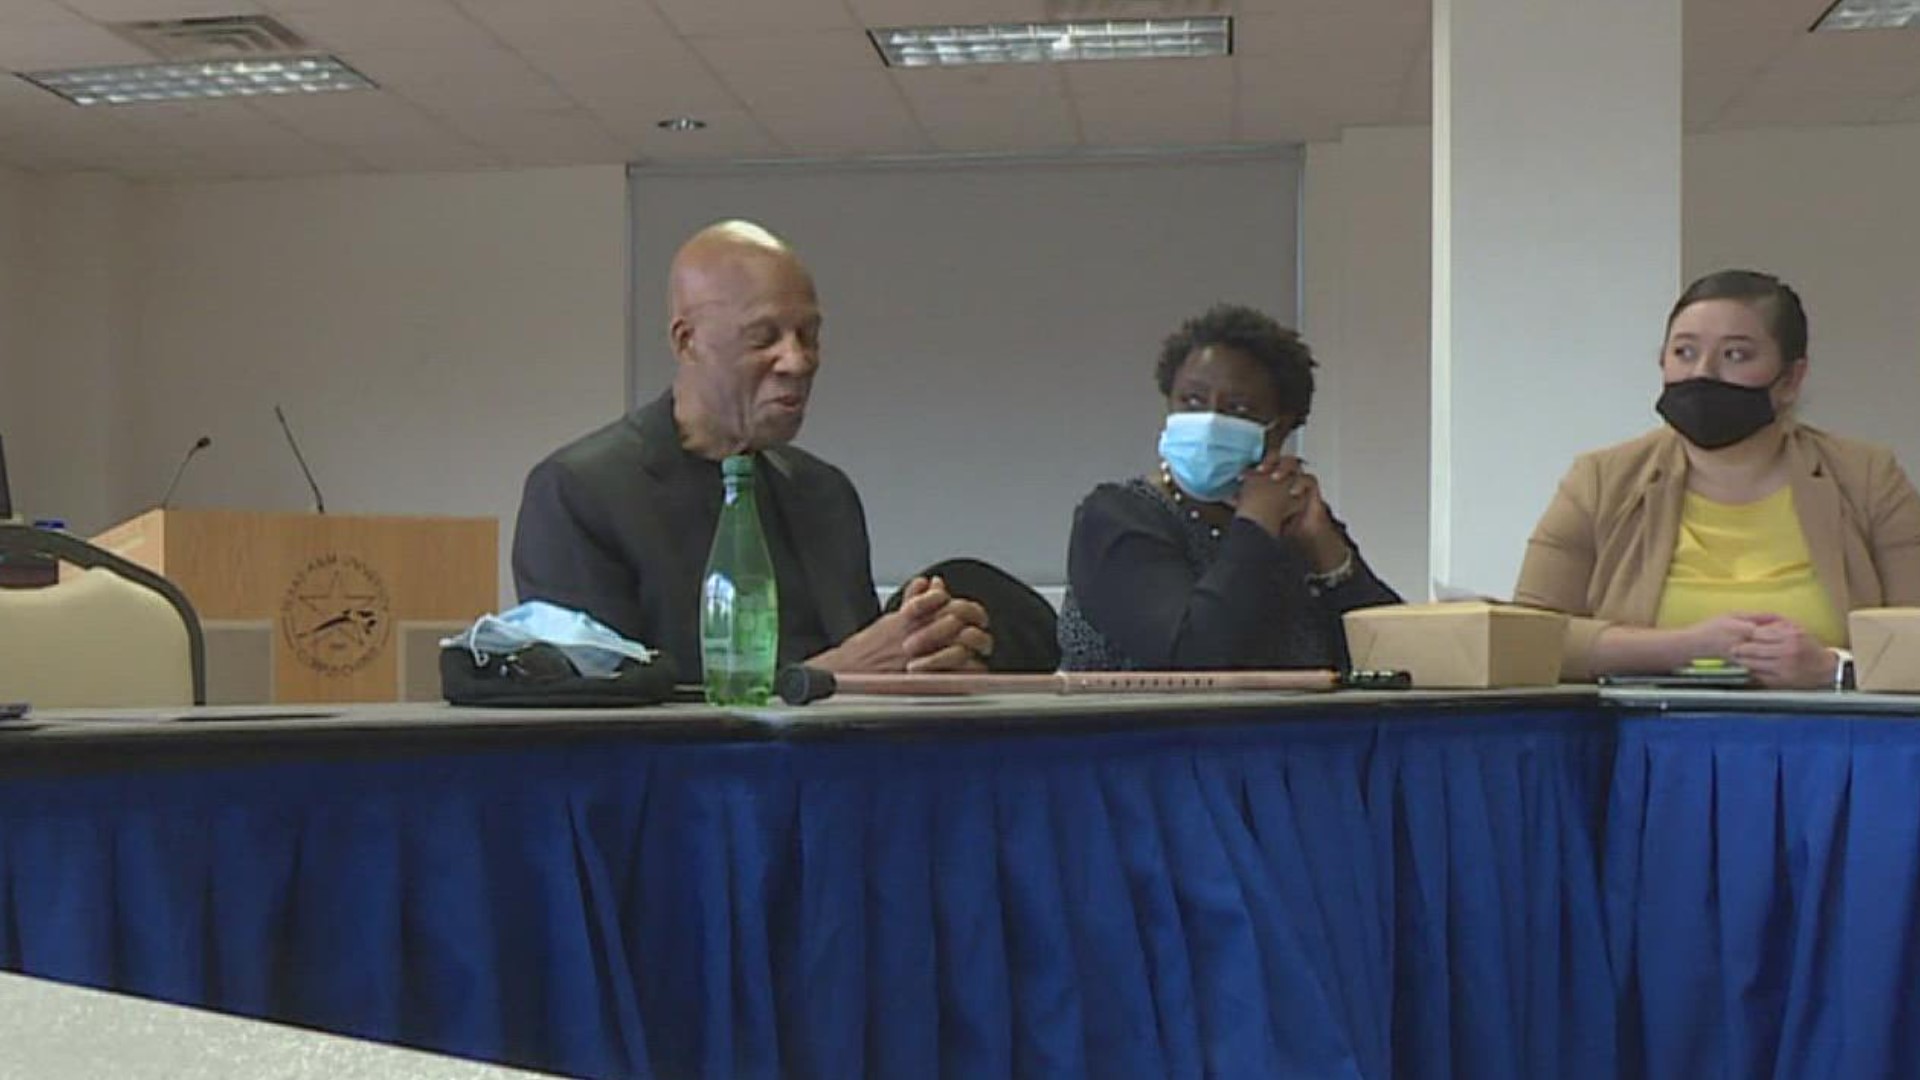 Dr. Terrence Roberts spoke with a group of students at Texas A&M University, Corpus Christi to discuss his efforts to desegregate schools.